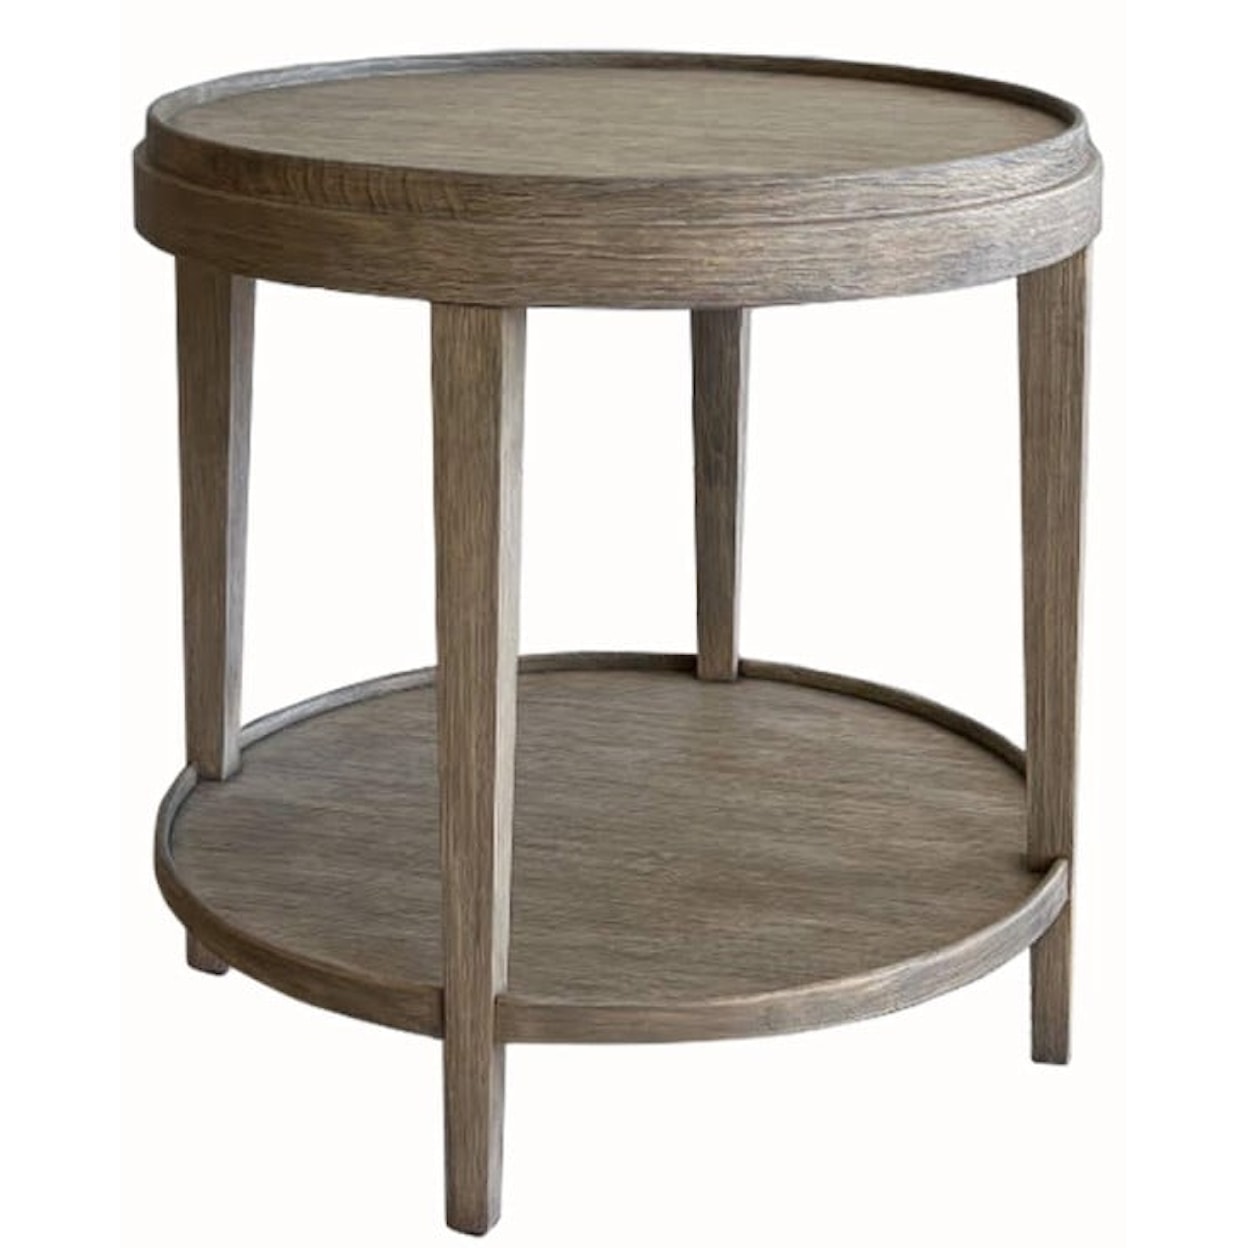 Oliver Home Furnishings End/ Side Tables ROUND END TABLE W/ LIP SHELF- RABBIT